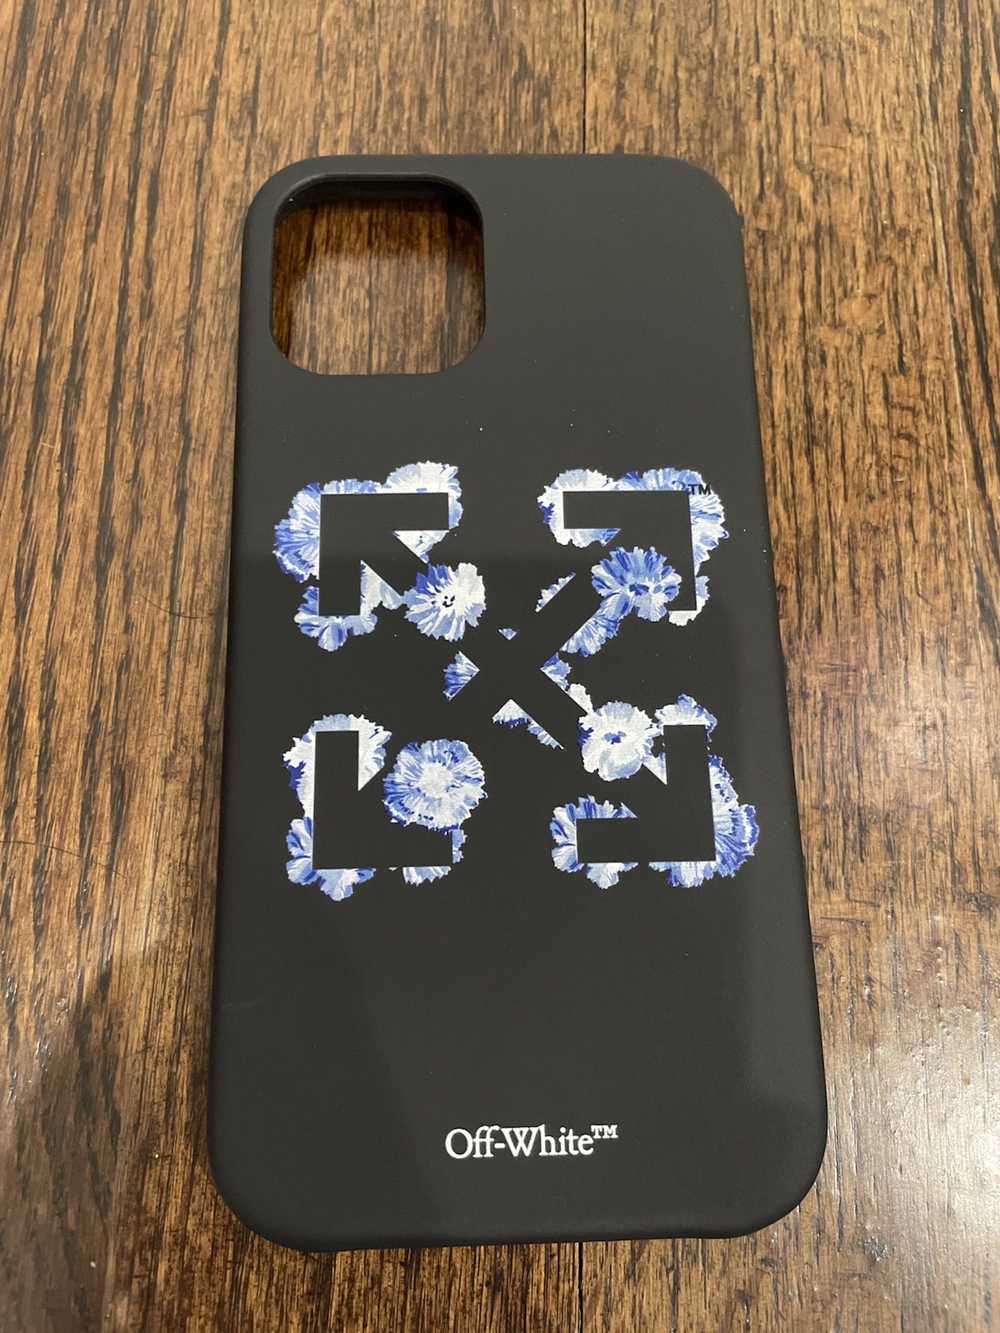 Off-White Off-White iPhone 12 Case - image 3